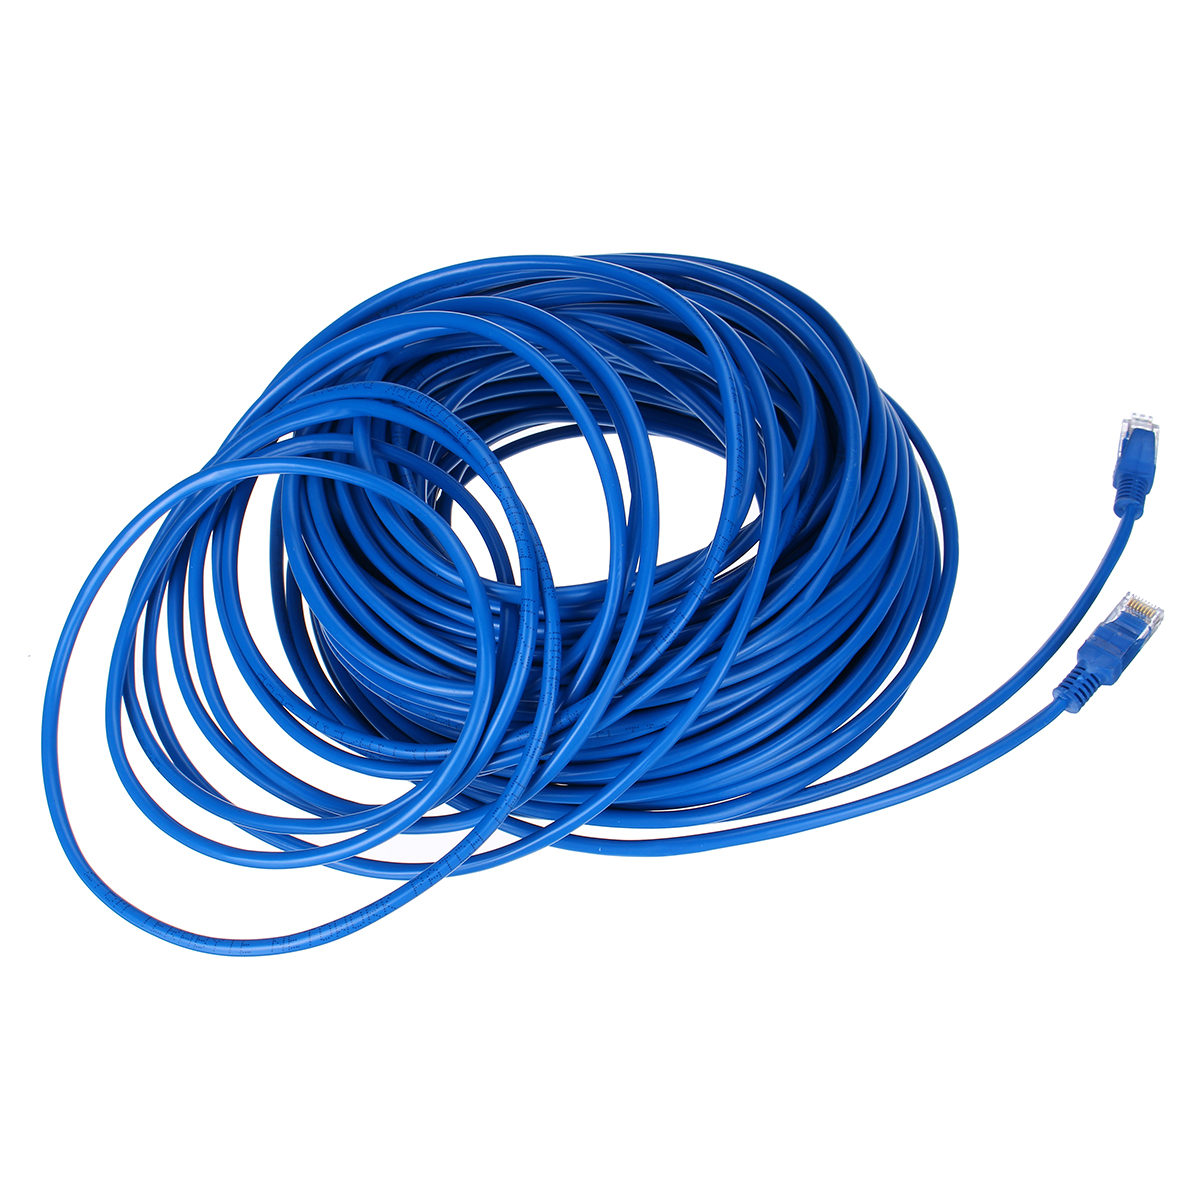 Fast-RJ-45---Male-To-Male-Network-Ethernet-LAN-Cable-Wire-10m15m20m30m50m-1567247-5